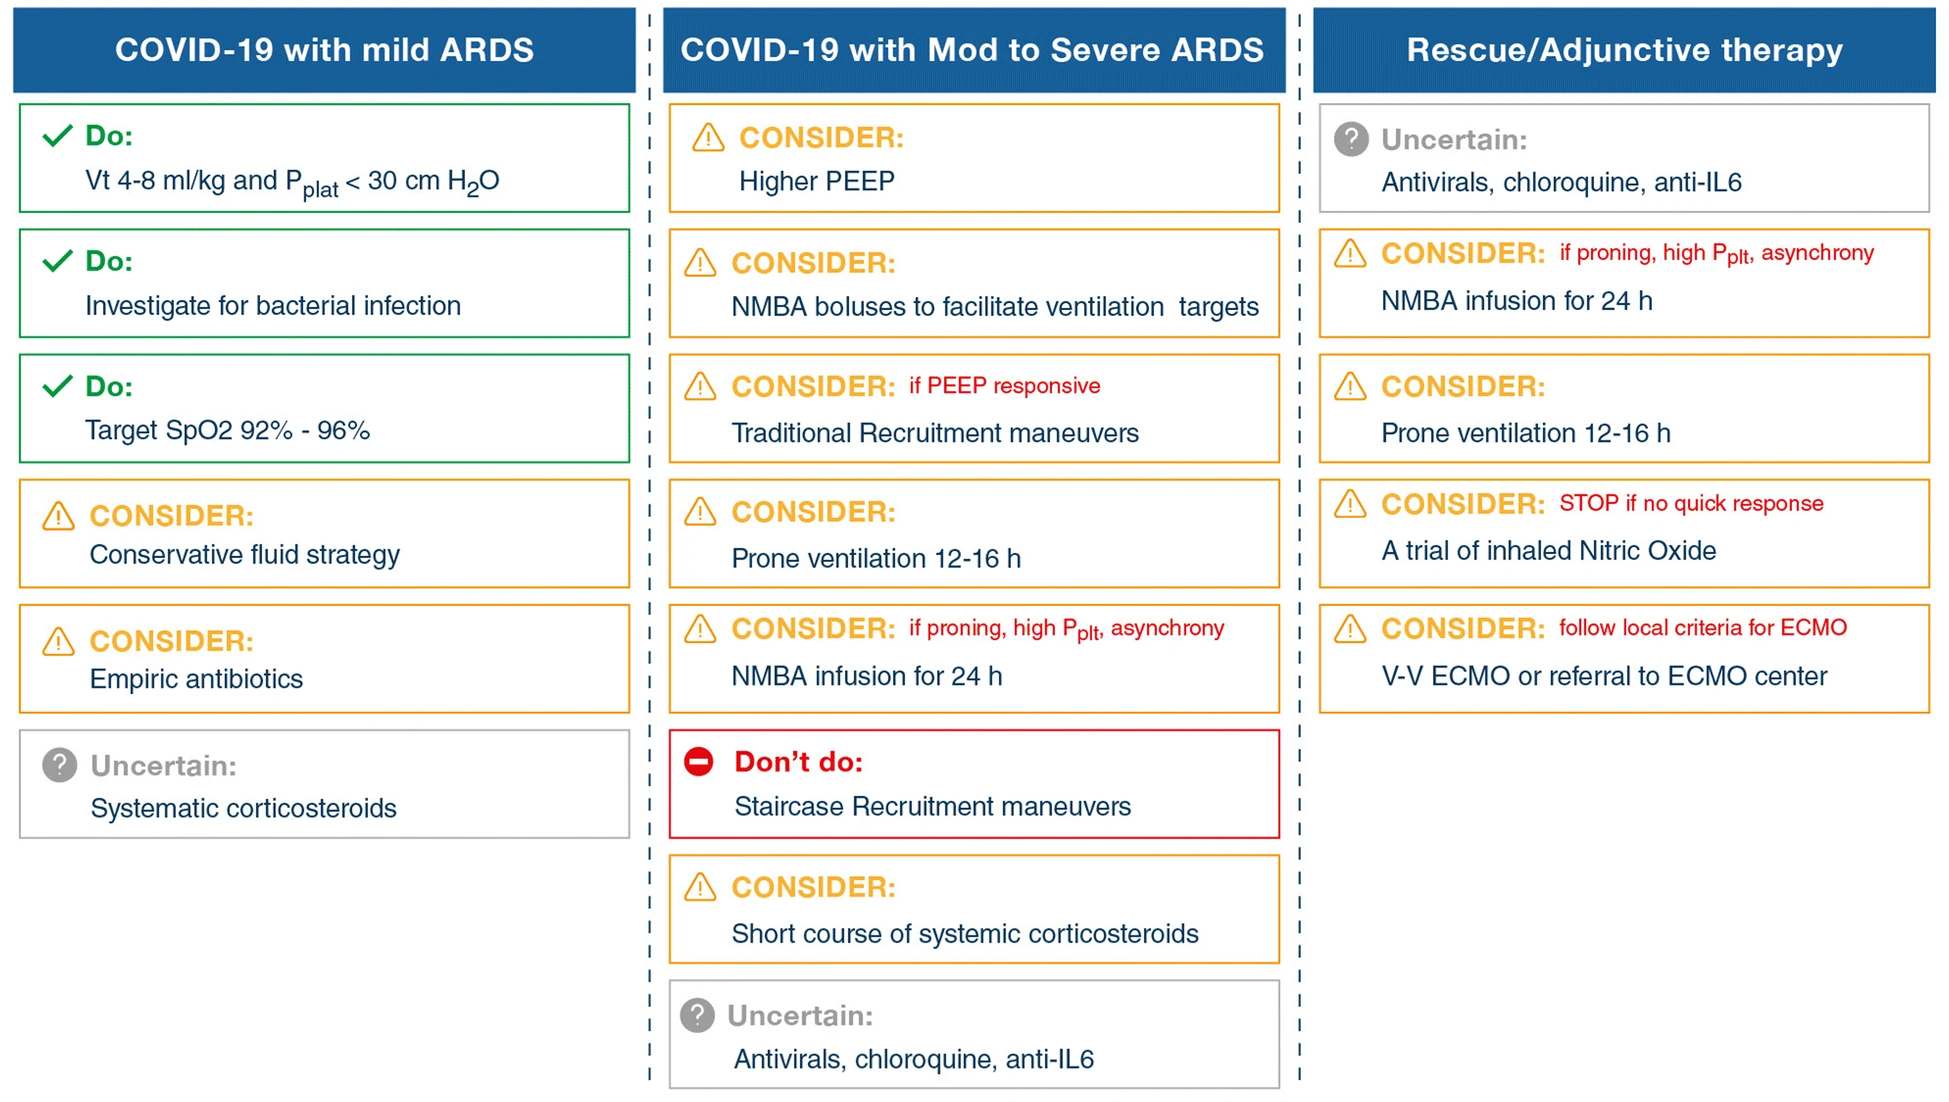 Summary of recommendations on the management of patients with COVID-19 and ARDS